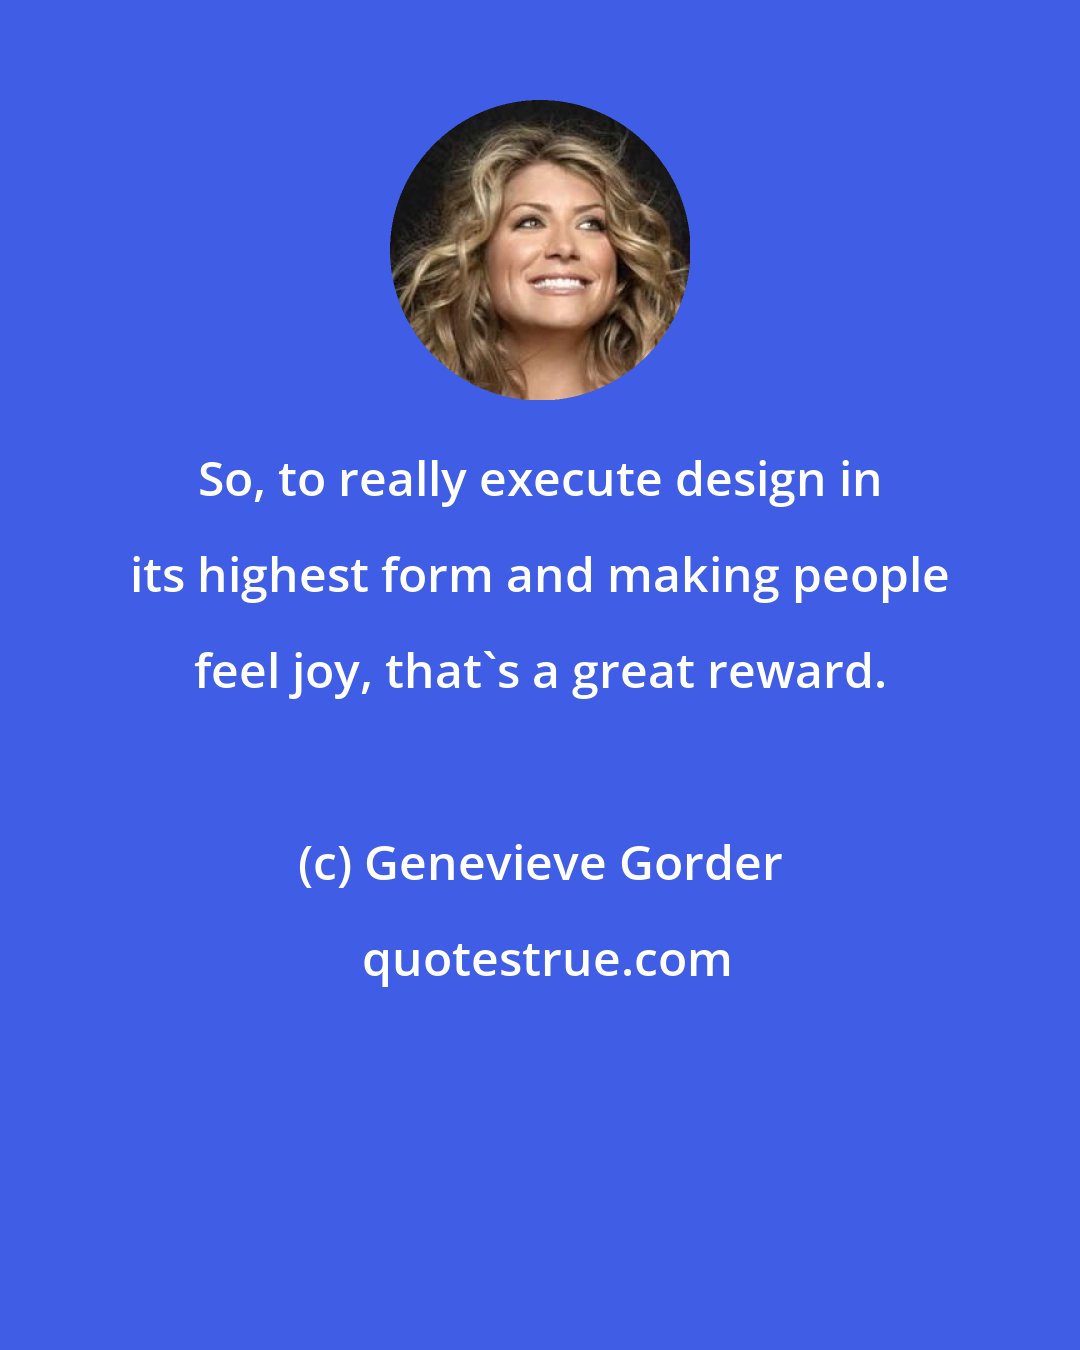 Genevieve Gorder: So, to really execute design in its highest form and making people feel joy, that's a great reward.